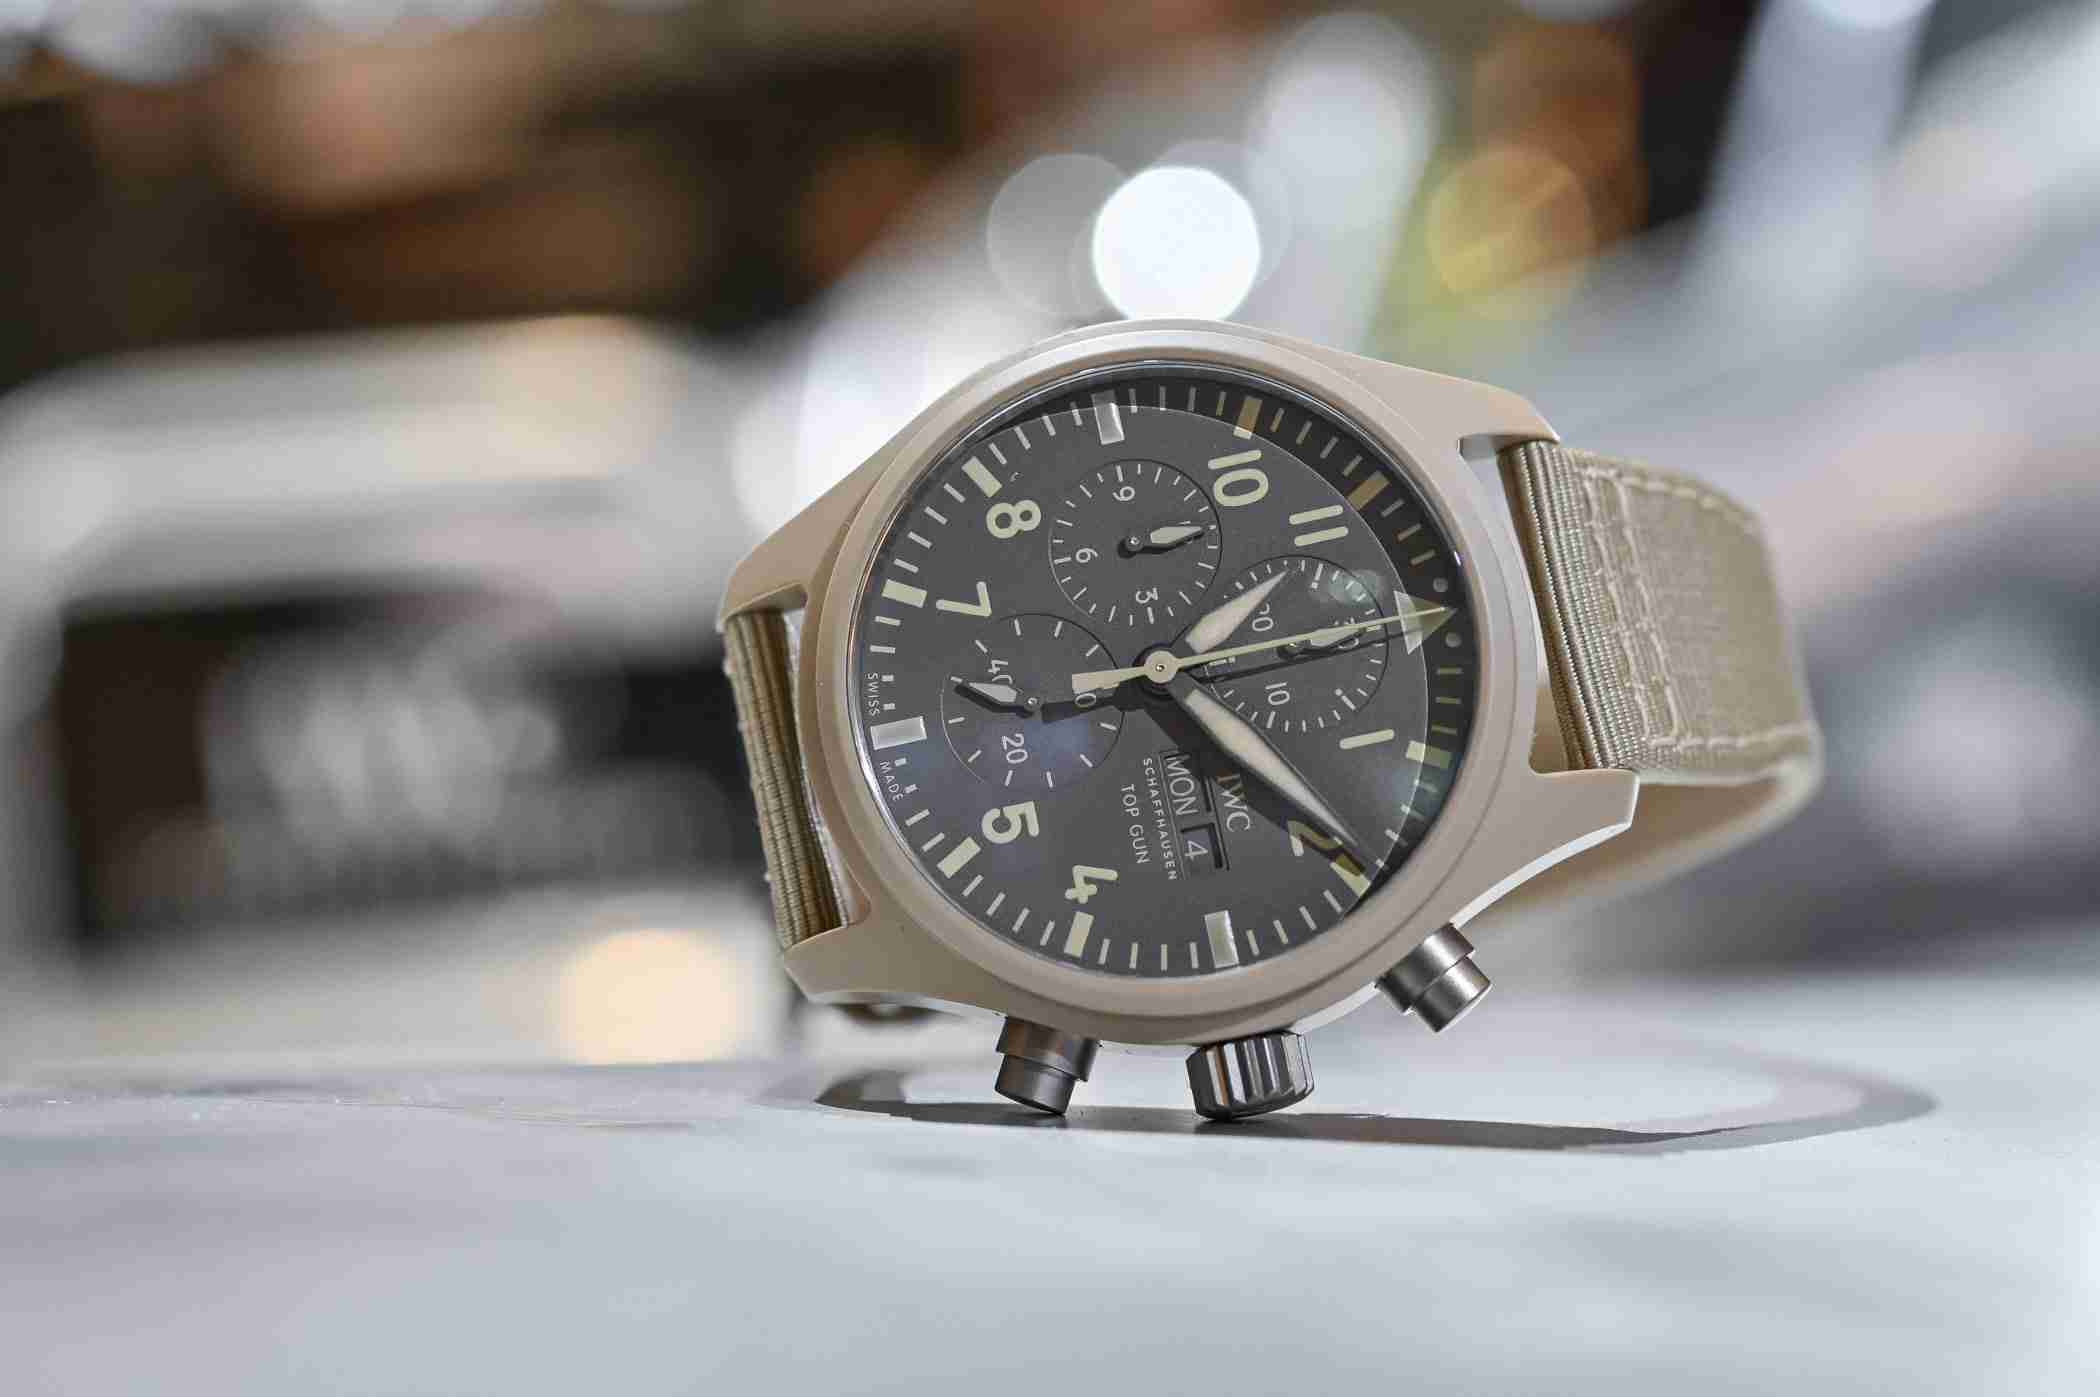 The Mojave Desert IWC Pilot's Chronograph TOP GUN Edition Brown Dial 44.5mm IW389103 Replica Watch For 2019 President's Day